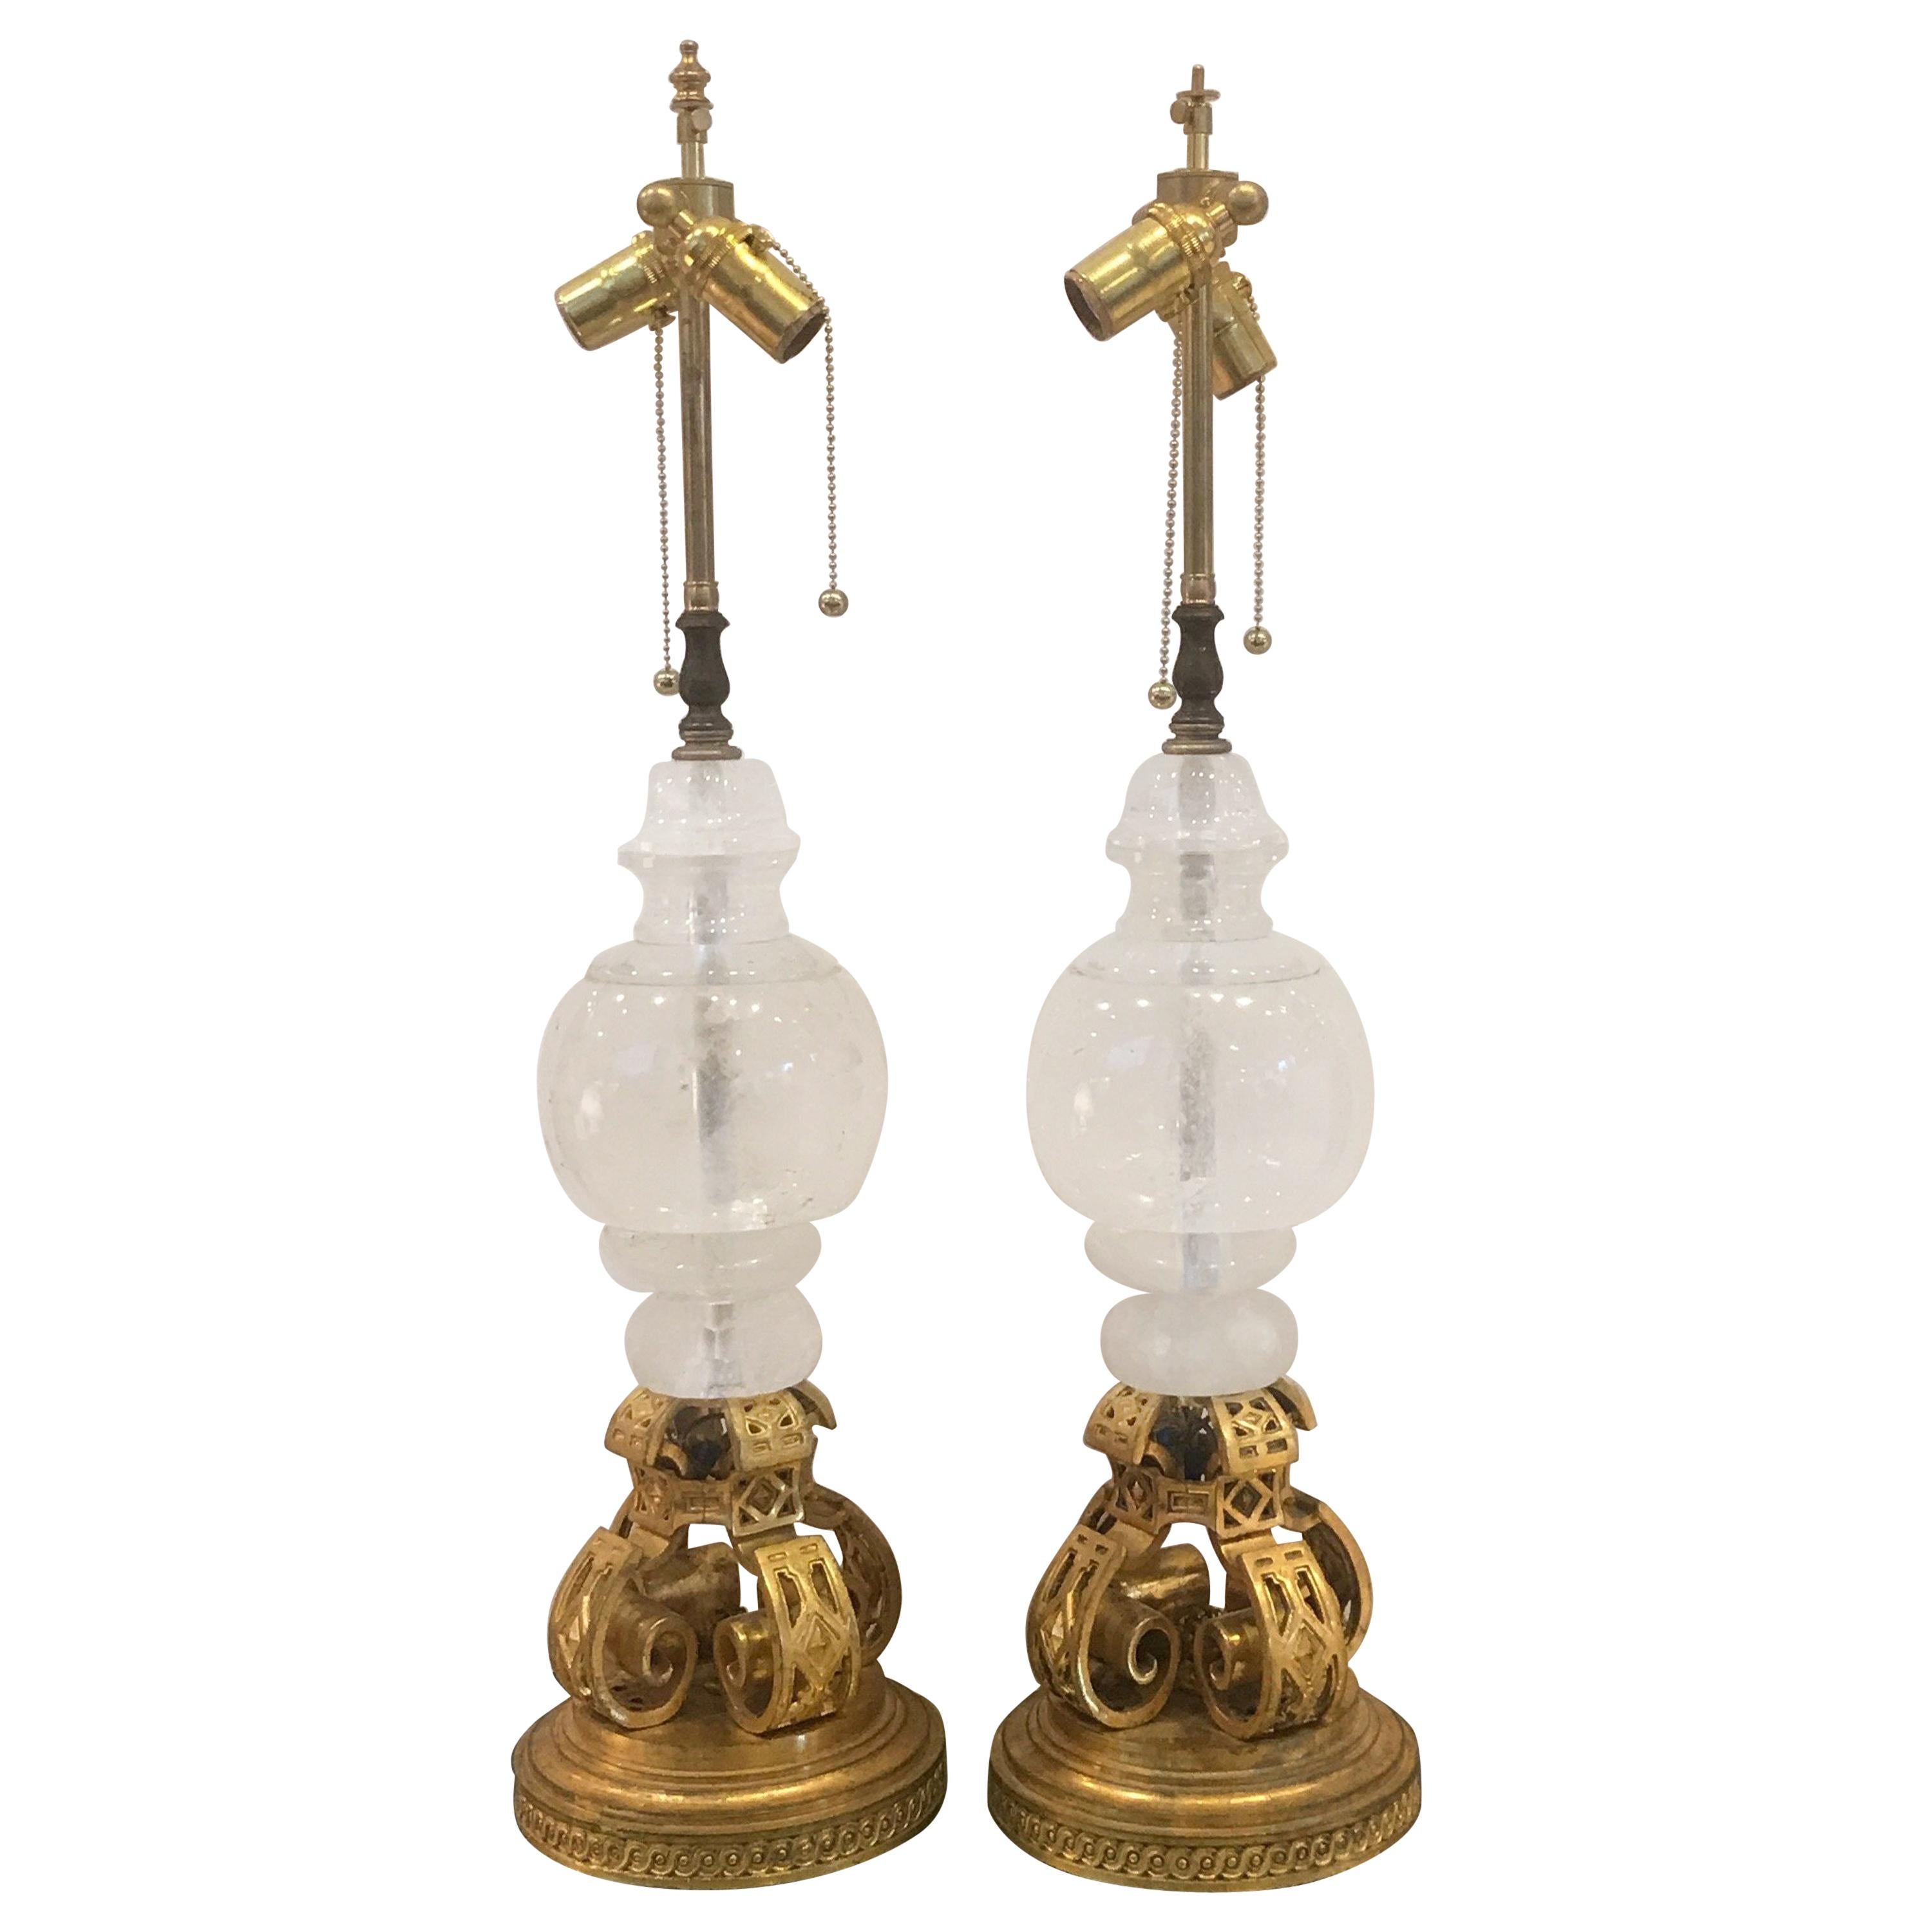 Pair of Rock Crystal and Ormolu Lamps